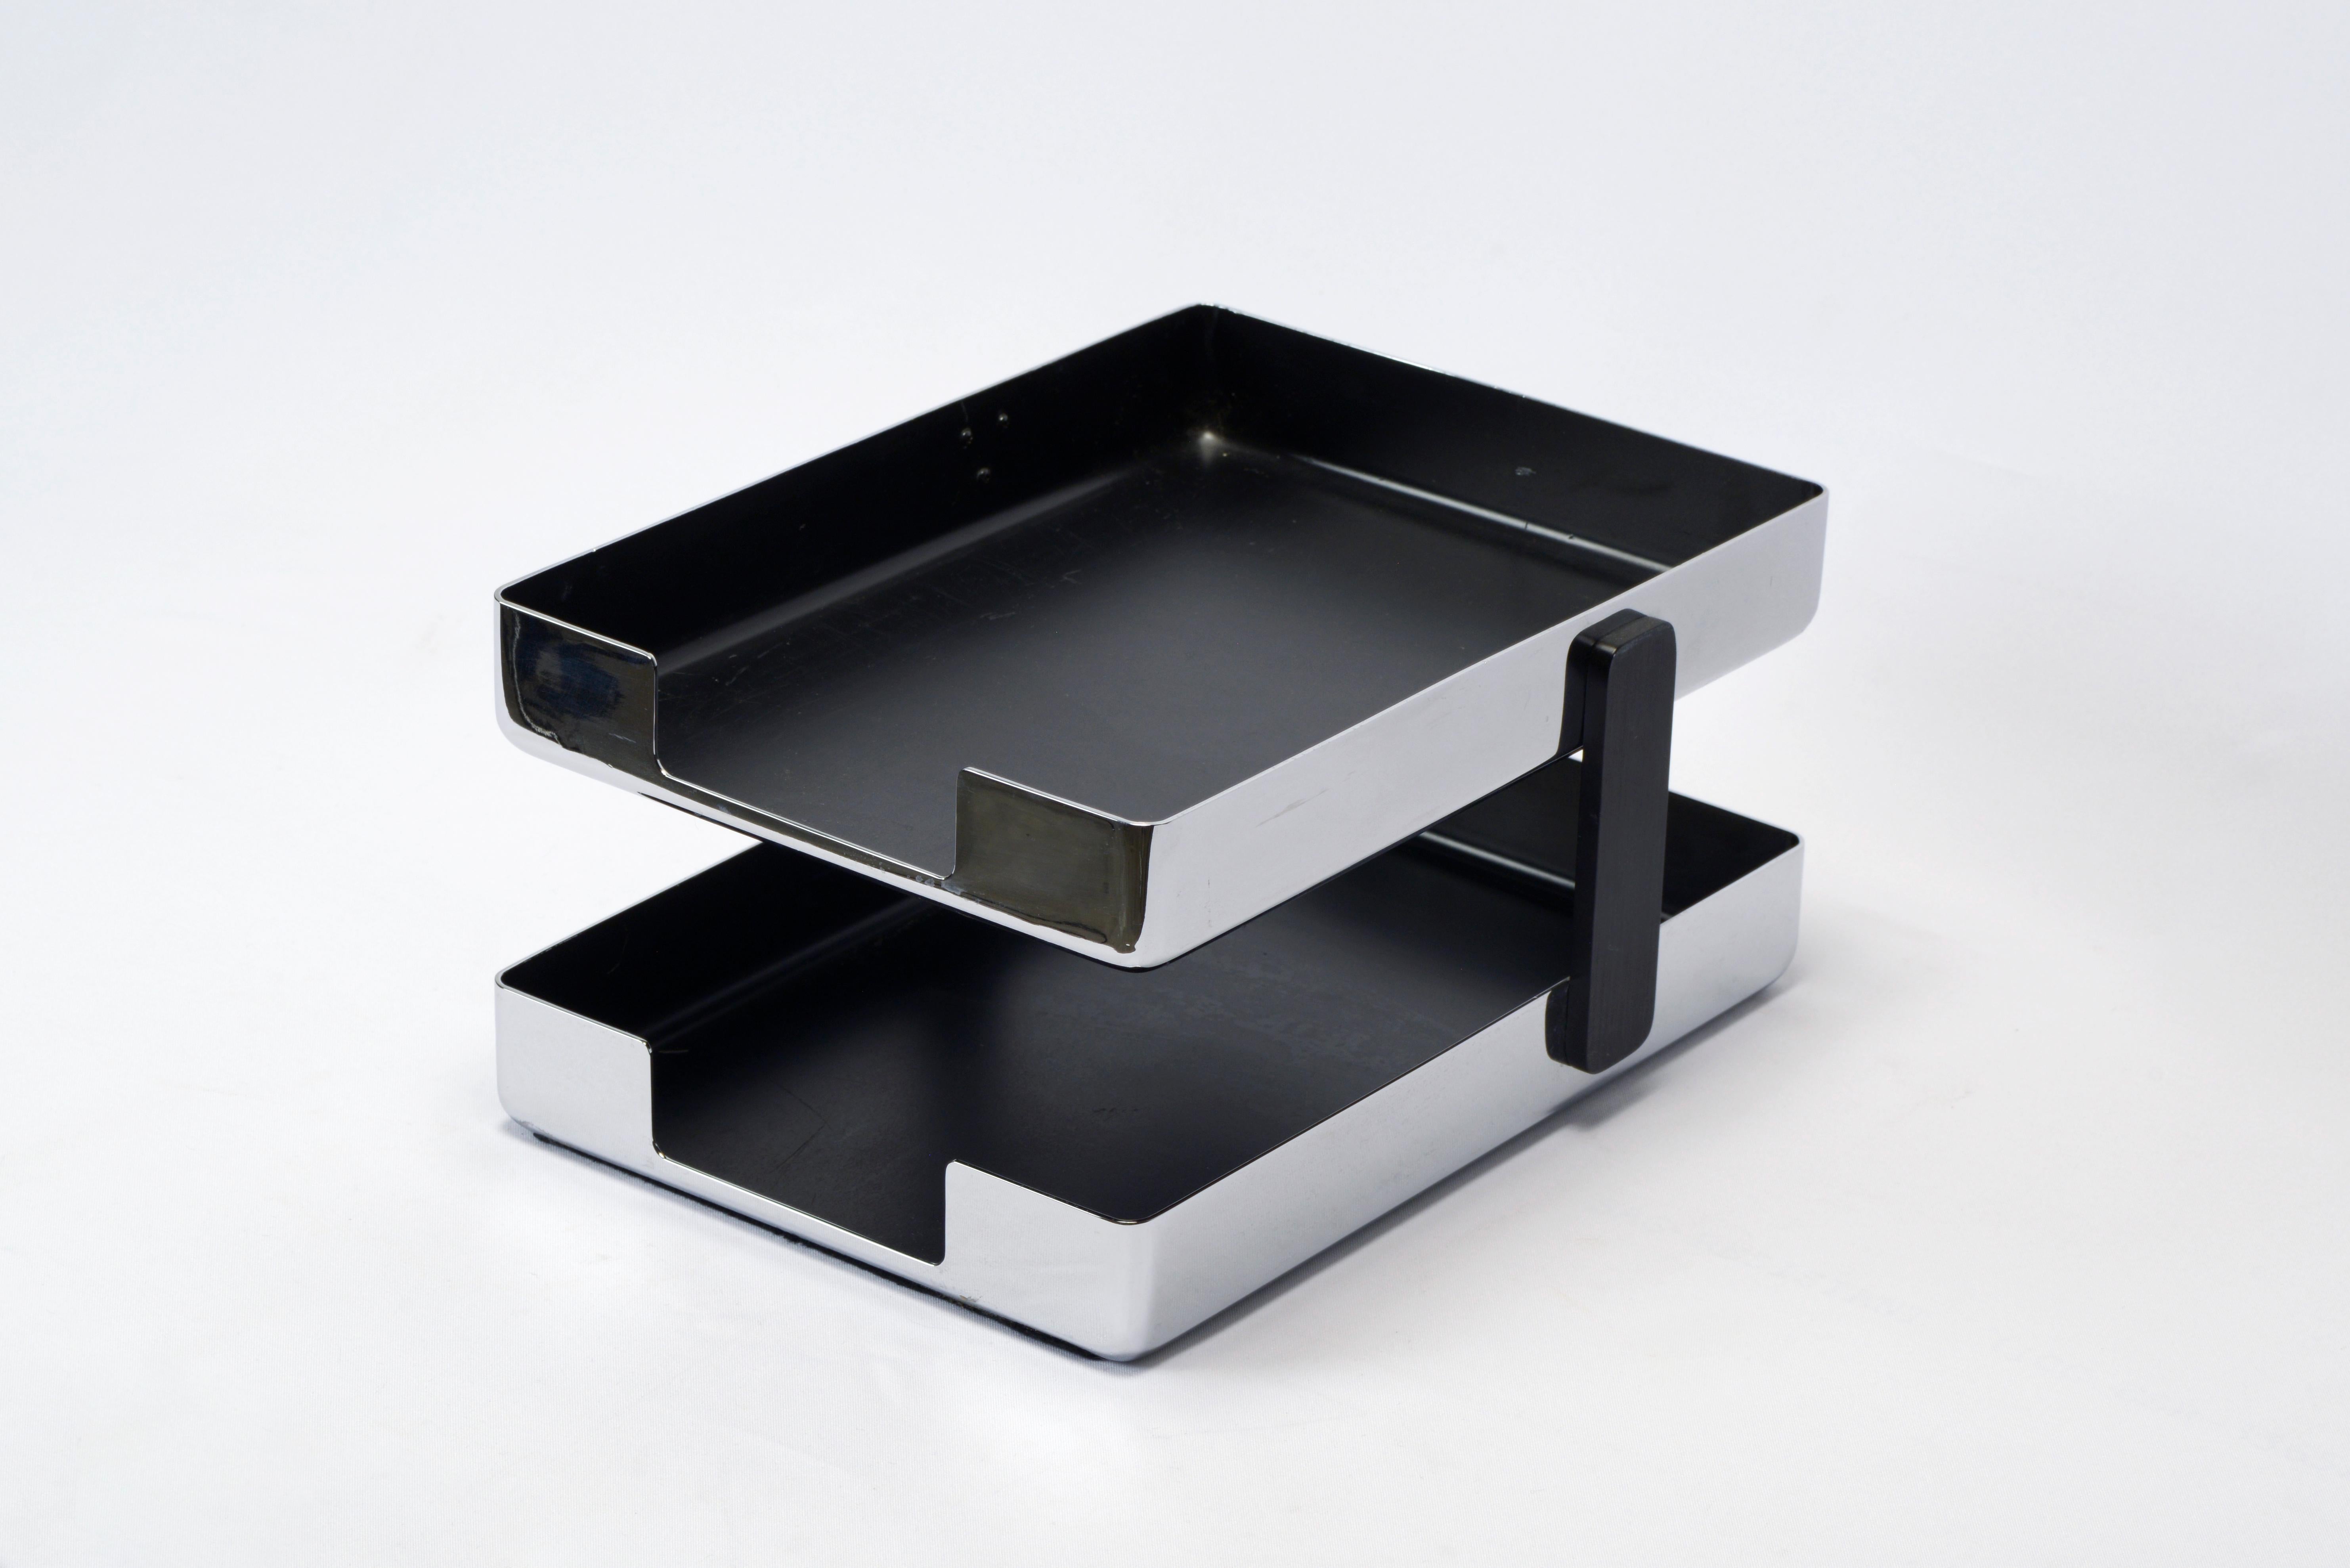 1970s modern desk tray designed by Metcor Los Angeles. Featuring two-tiers and a shiny chrome finish to keep your in-and-out papers organized and looking good. Uncommon find!

The unit is in very good vintage condition. Surface shows mild